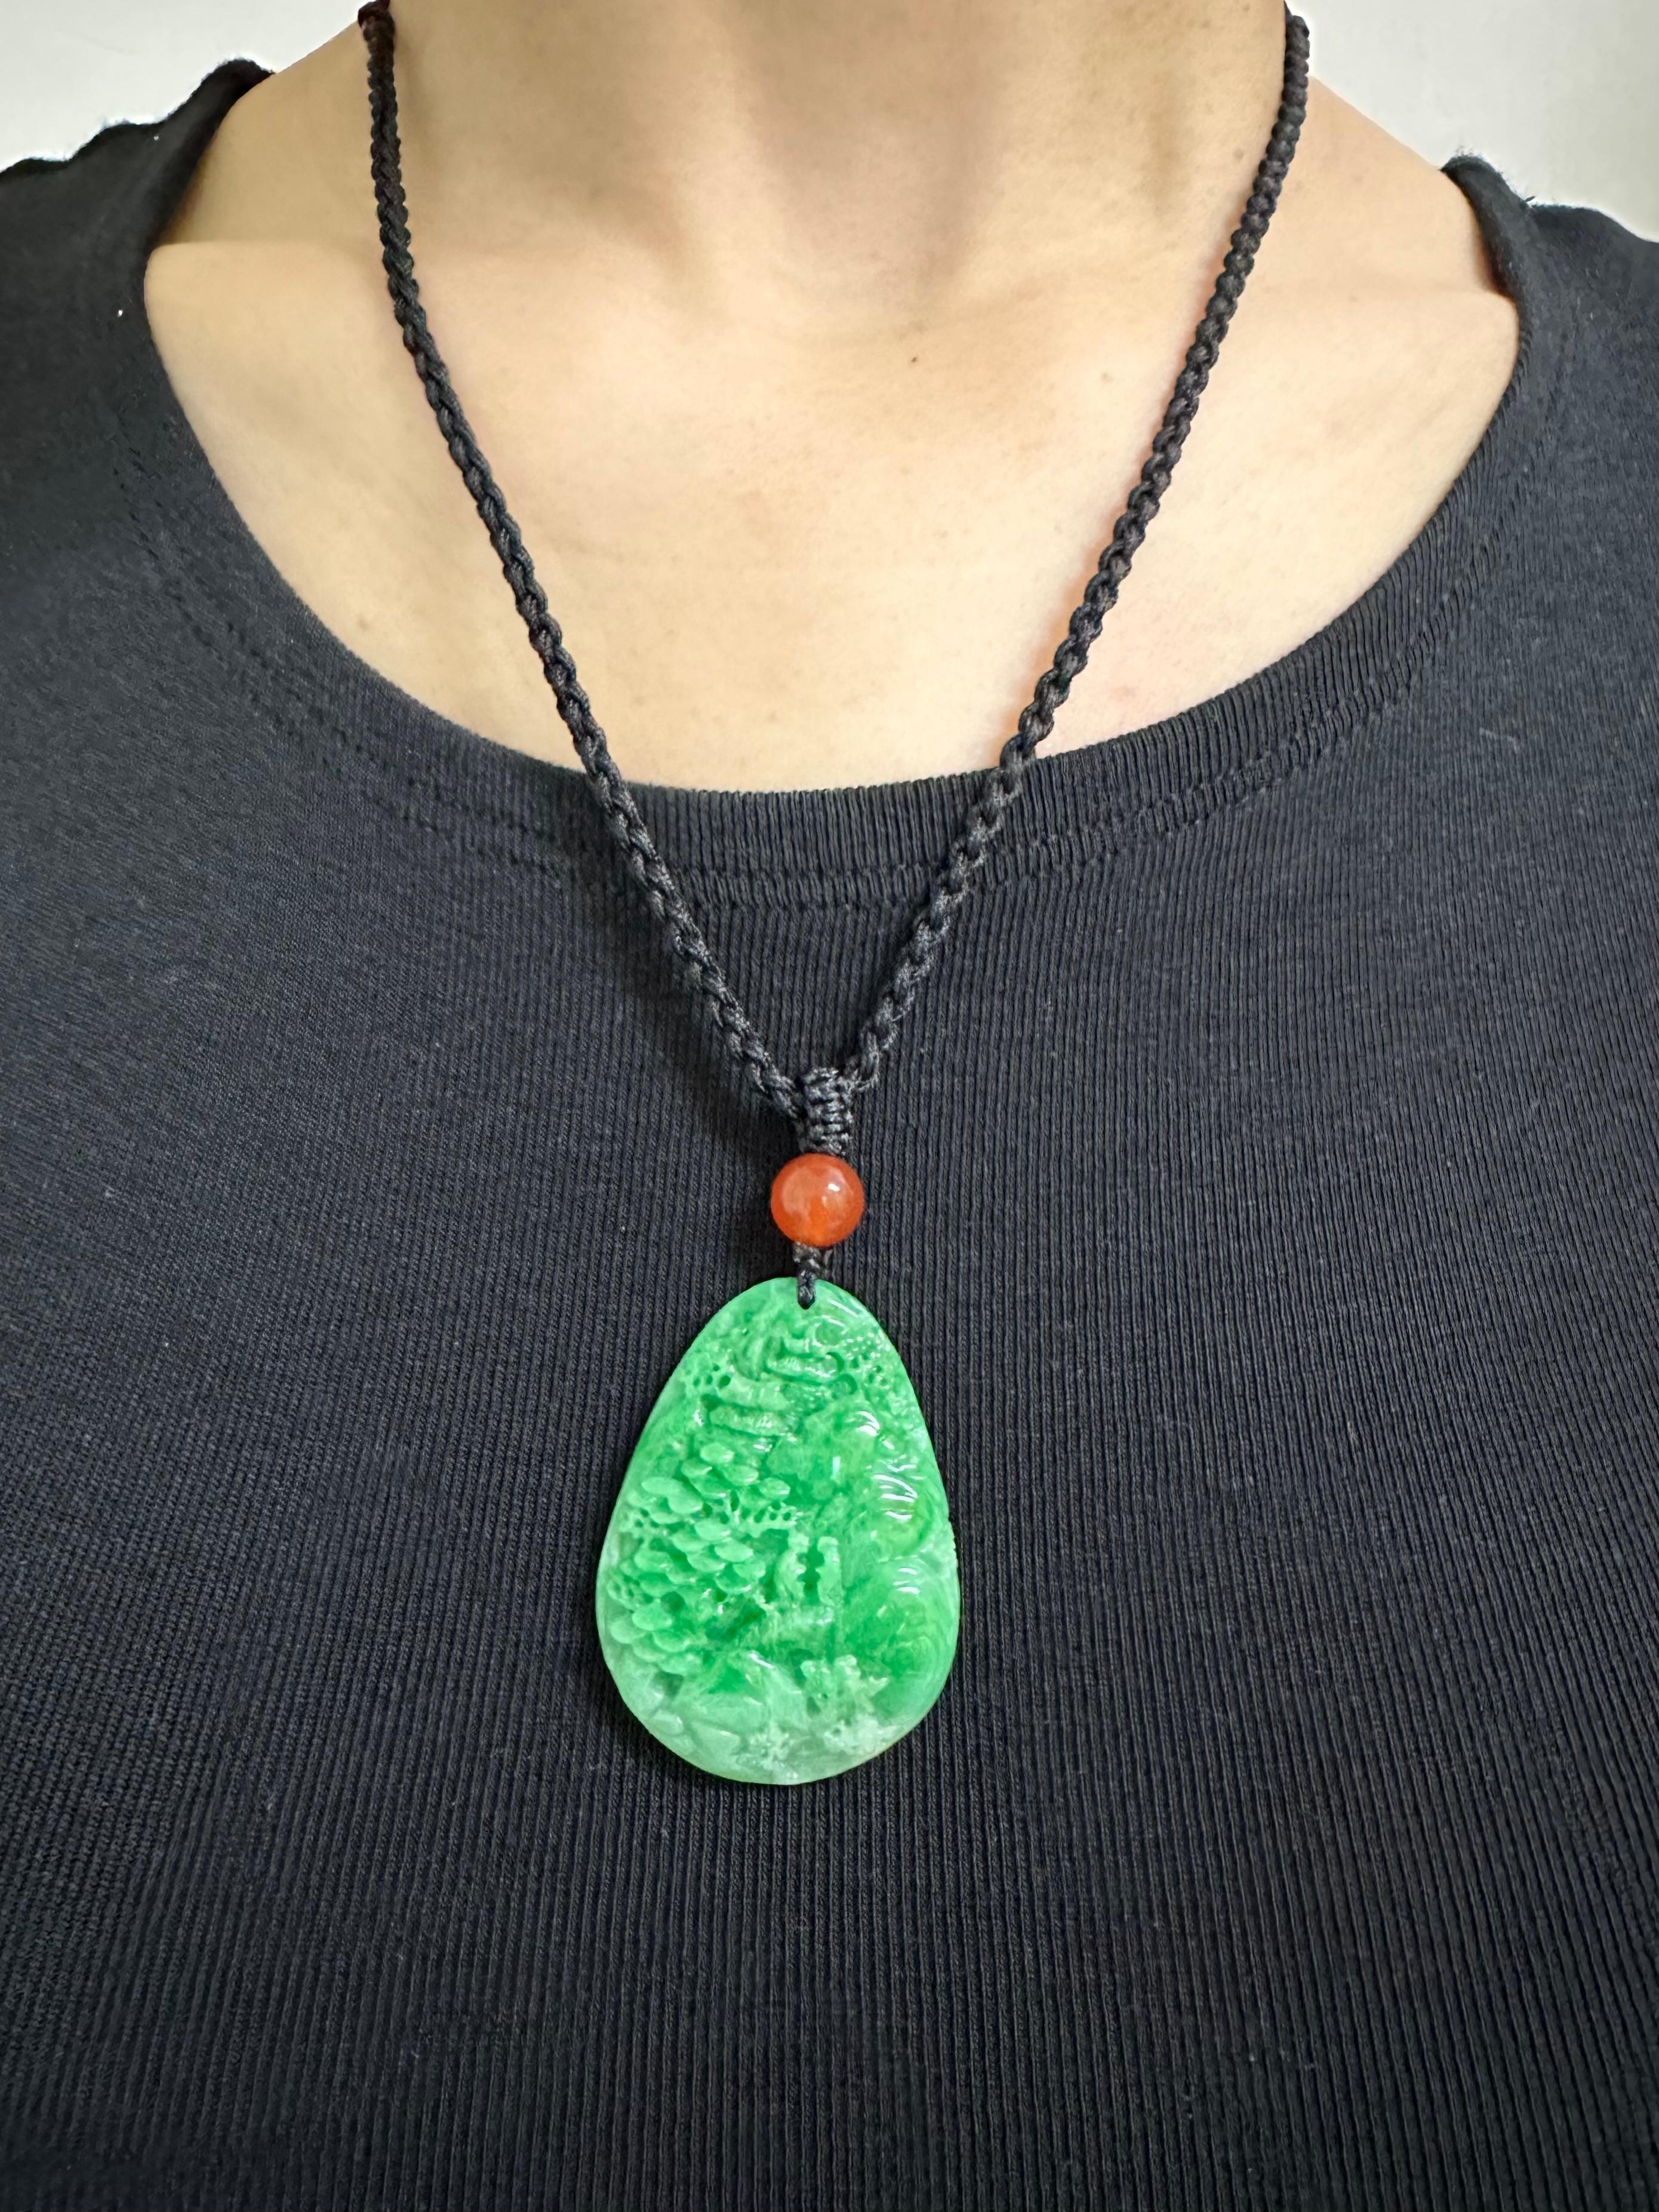 Please check out the HD video. This is certified natural jadeite jade. The jade carving depicts a Chinese scenic mountain. Masterful carving is on both sides of the jade pendant. The apple green jade and red agate bead are held together with a